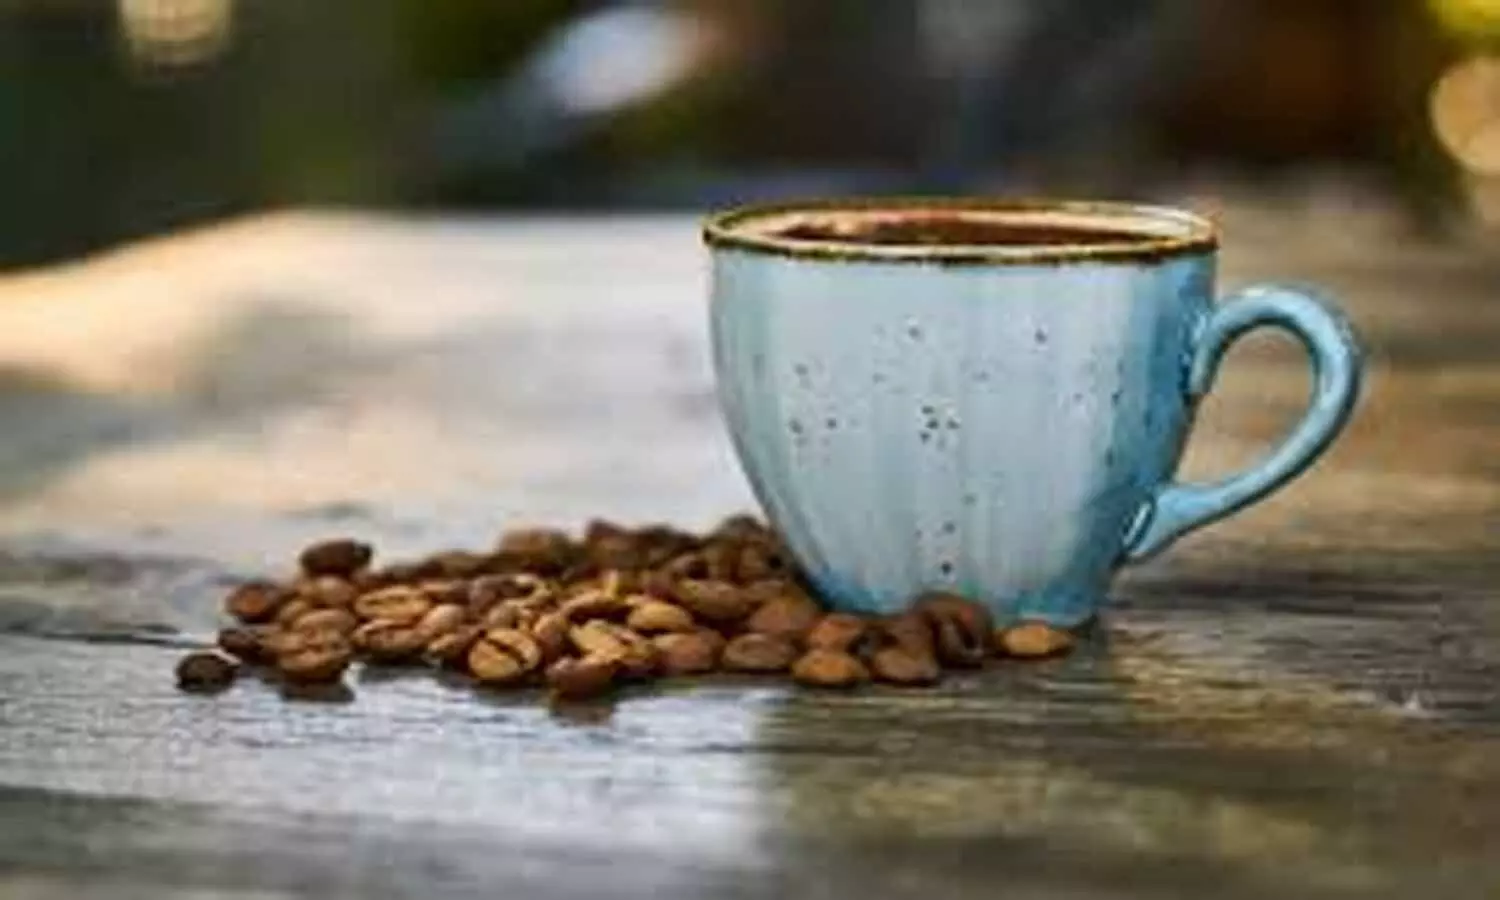 Researchers develop coffee packed with gut-friendly live probiotics